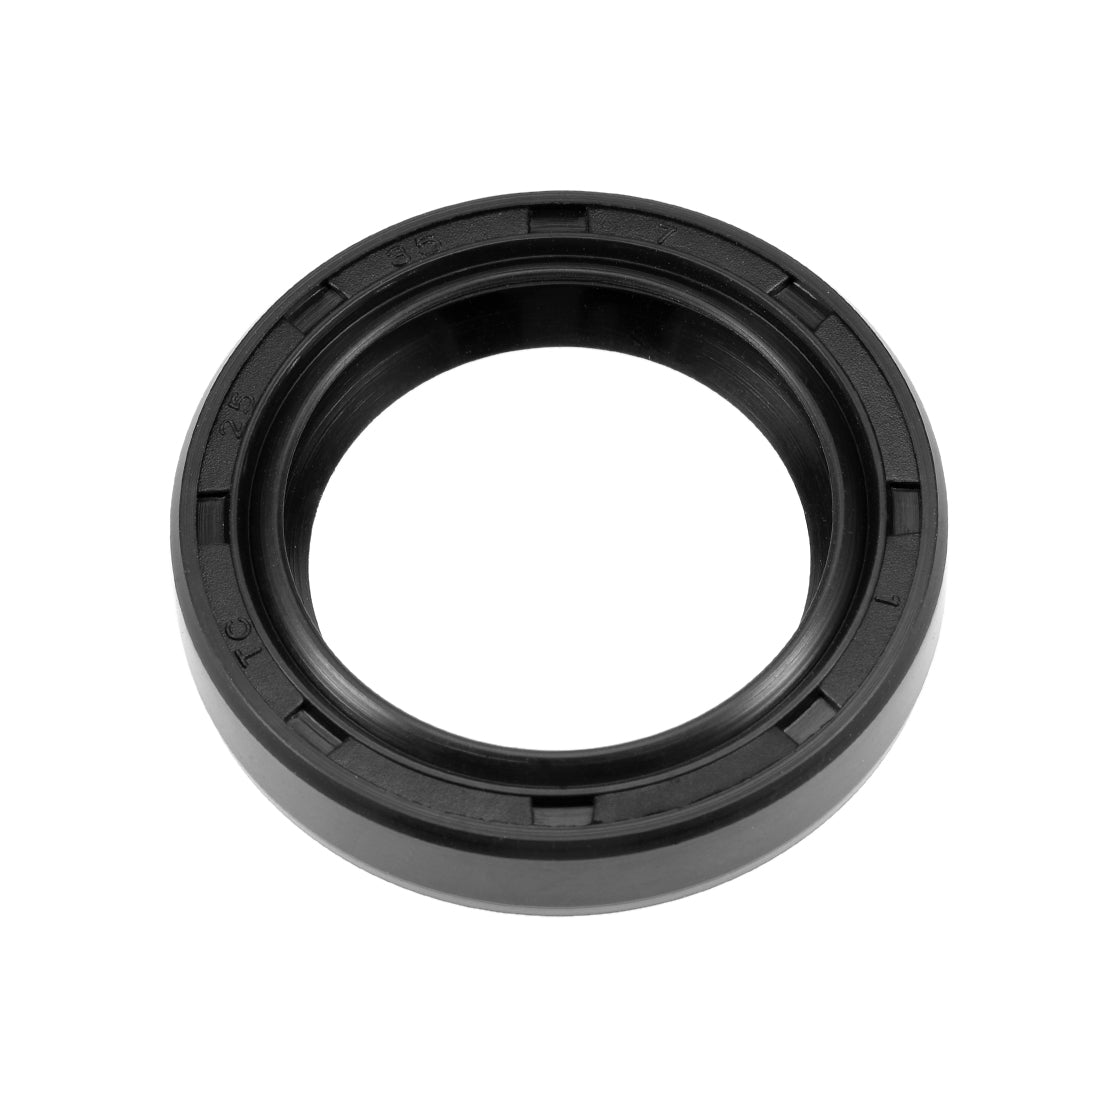 uxcell Uxcell Oil Seal, TC 25mm x 35mm x 7mm, Nitrile Rubber Cover Double Lip